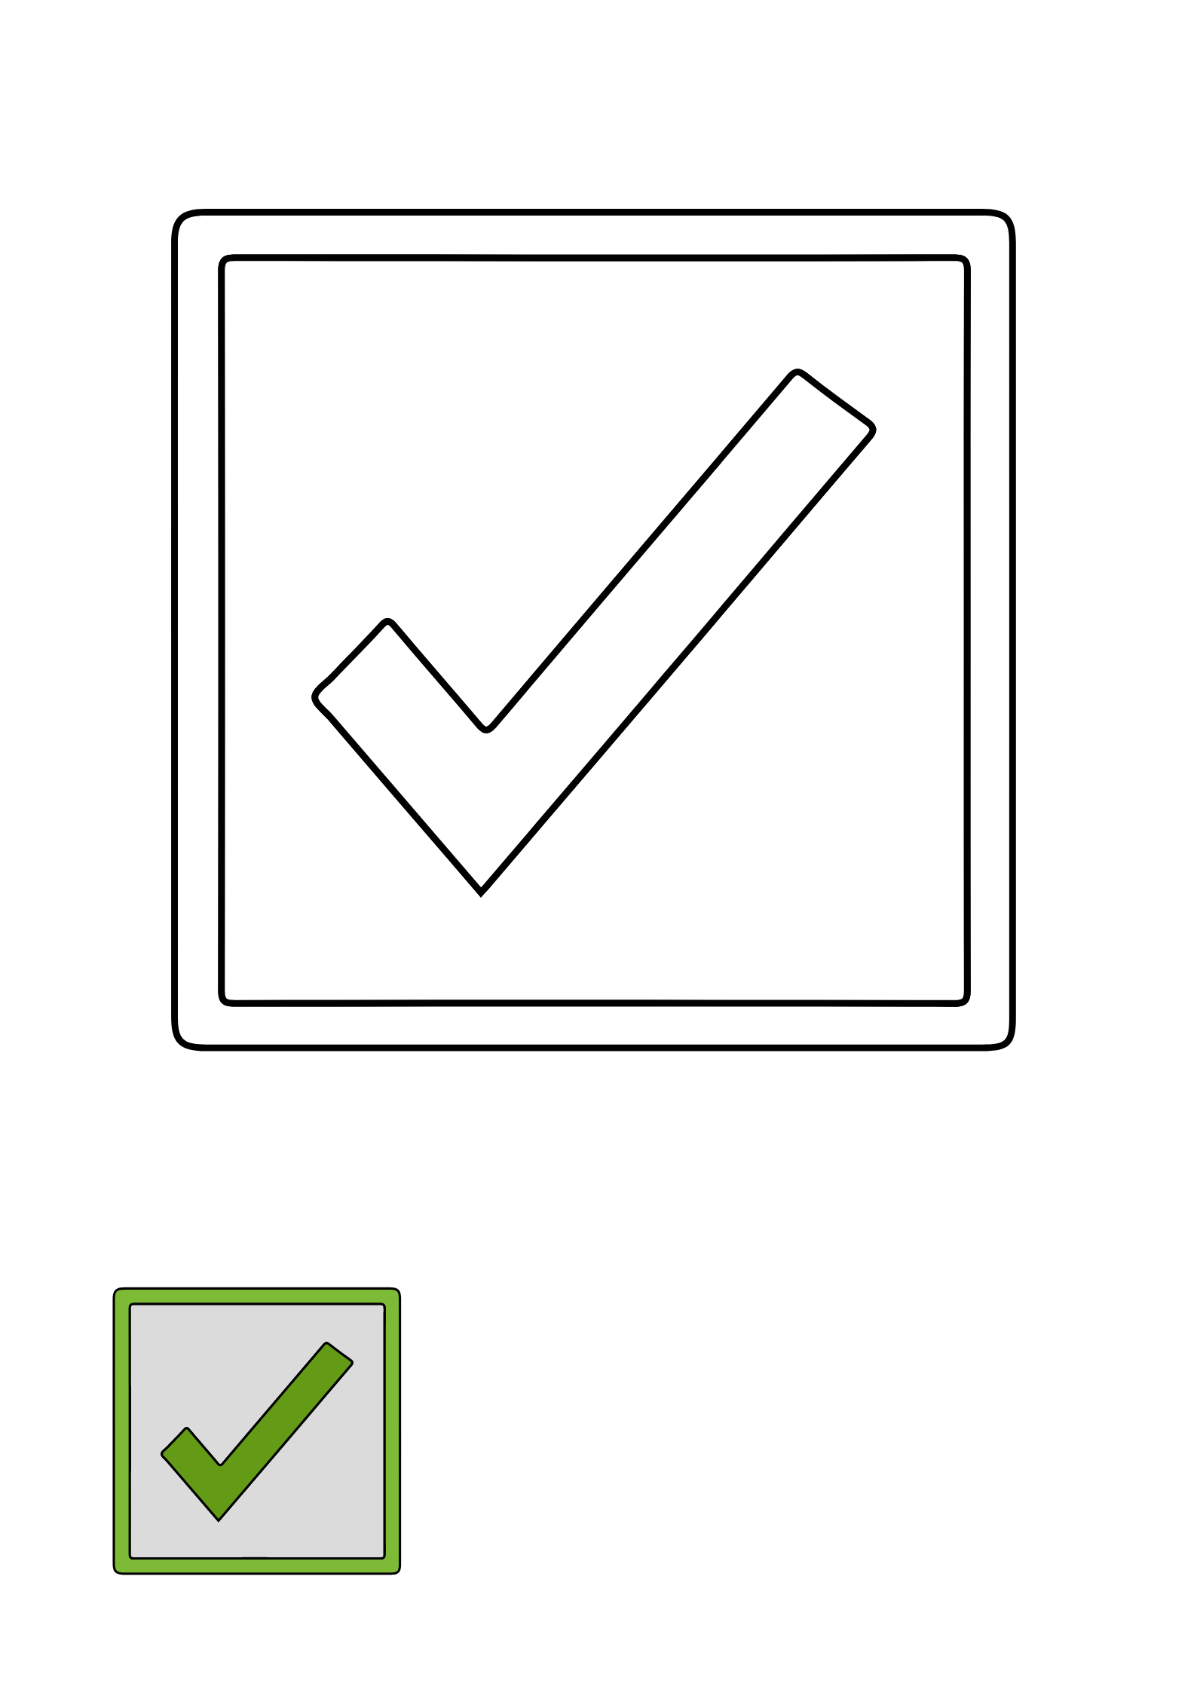 Check Mark Box coloring page Template